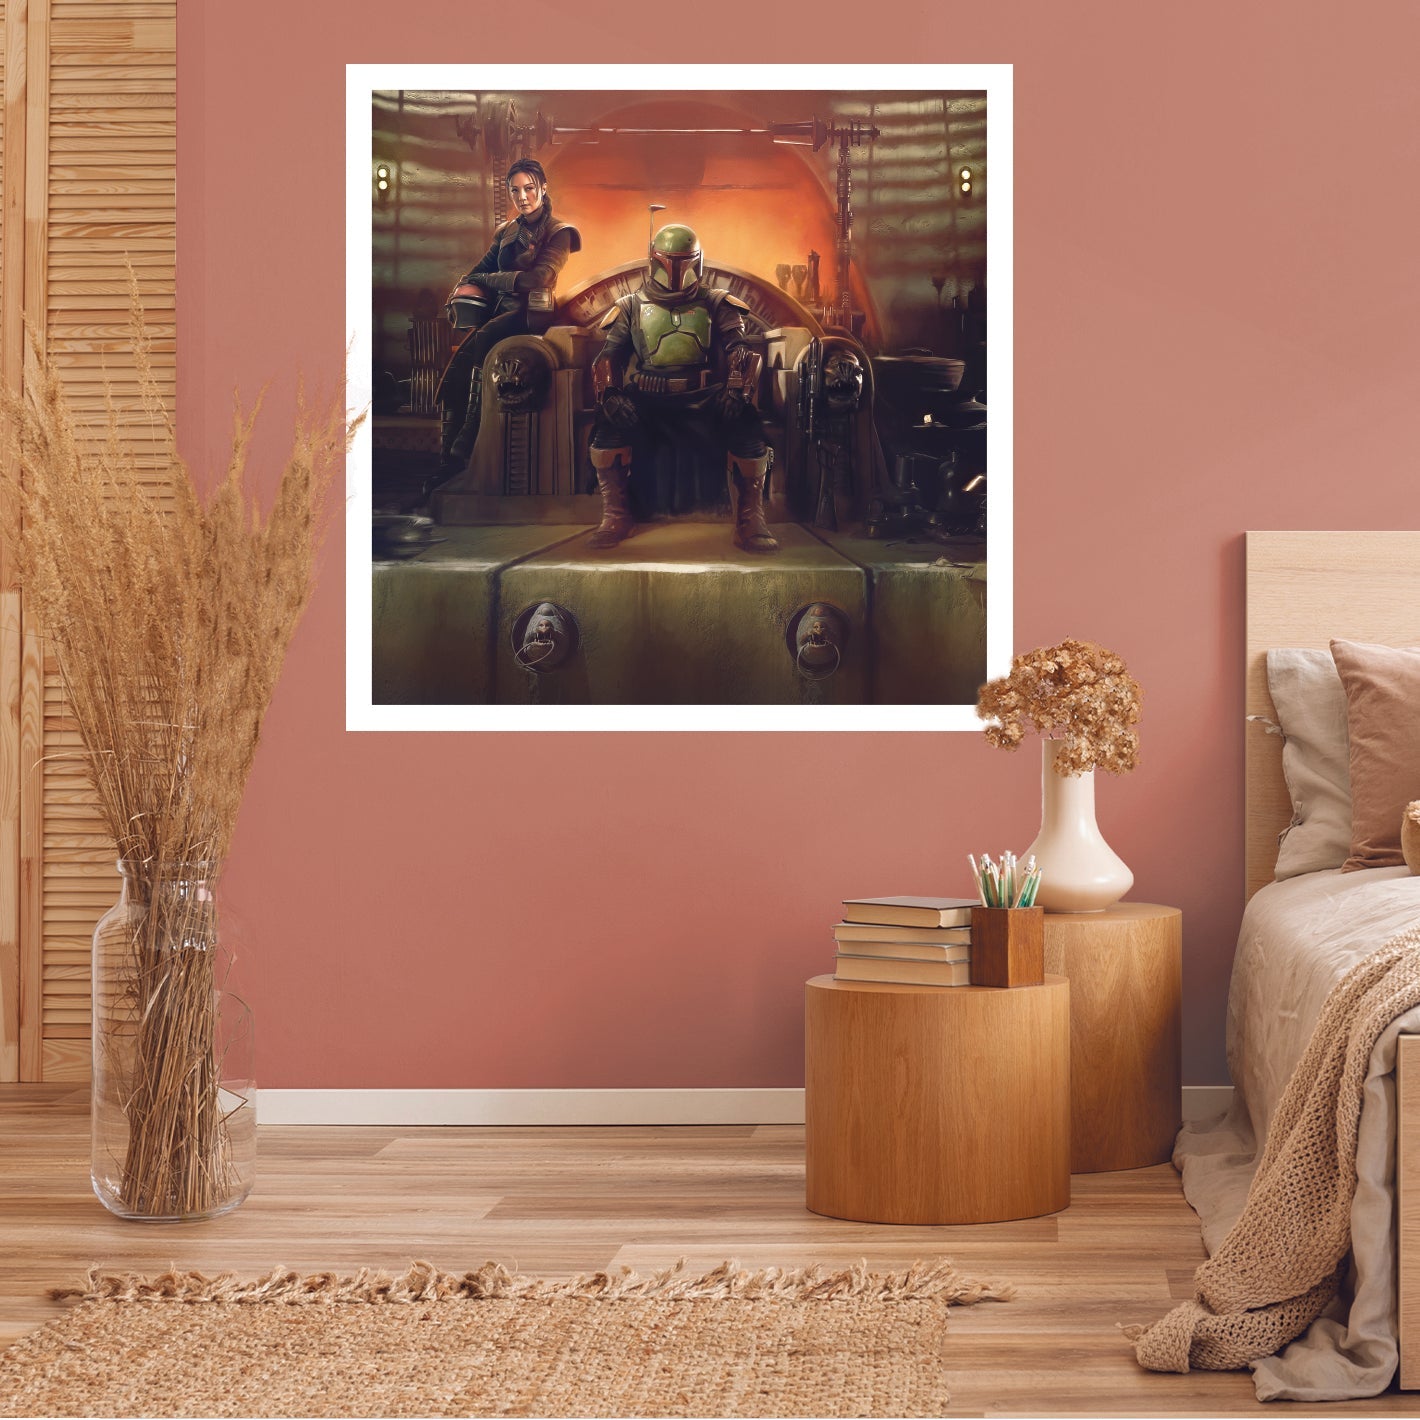 Book of Boba Fett: Boba Fett & Fennec Shand Throne Room Painted Poster - Officially Licensed Star Wars Removable Adhesive Decal